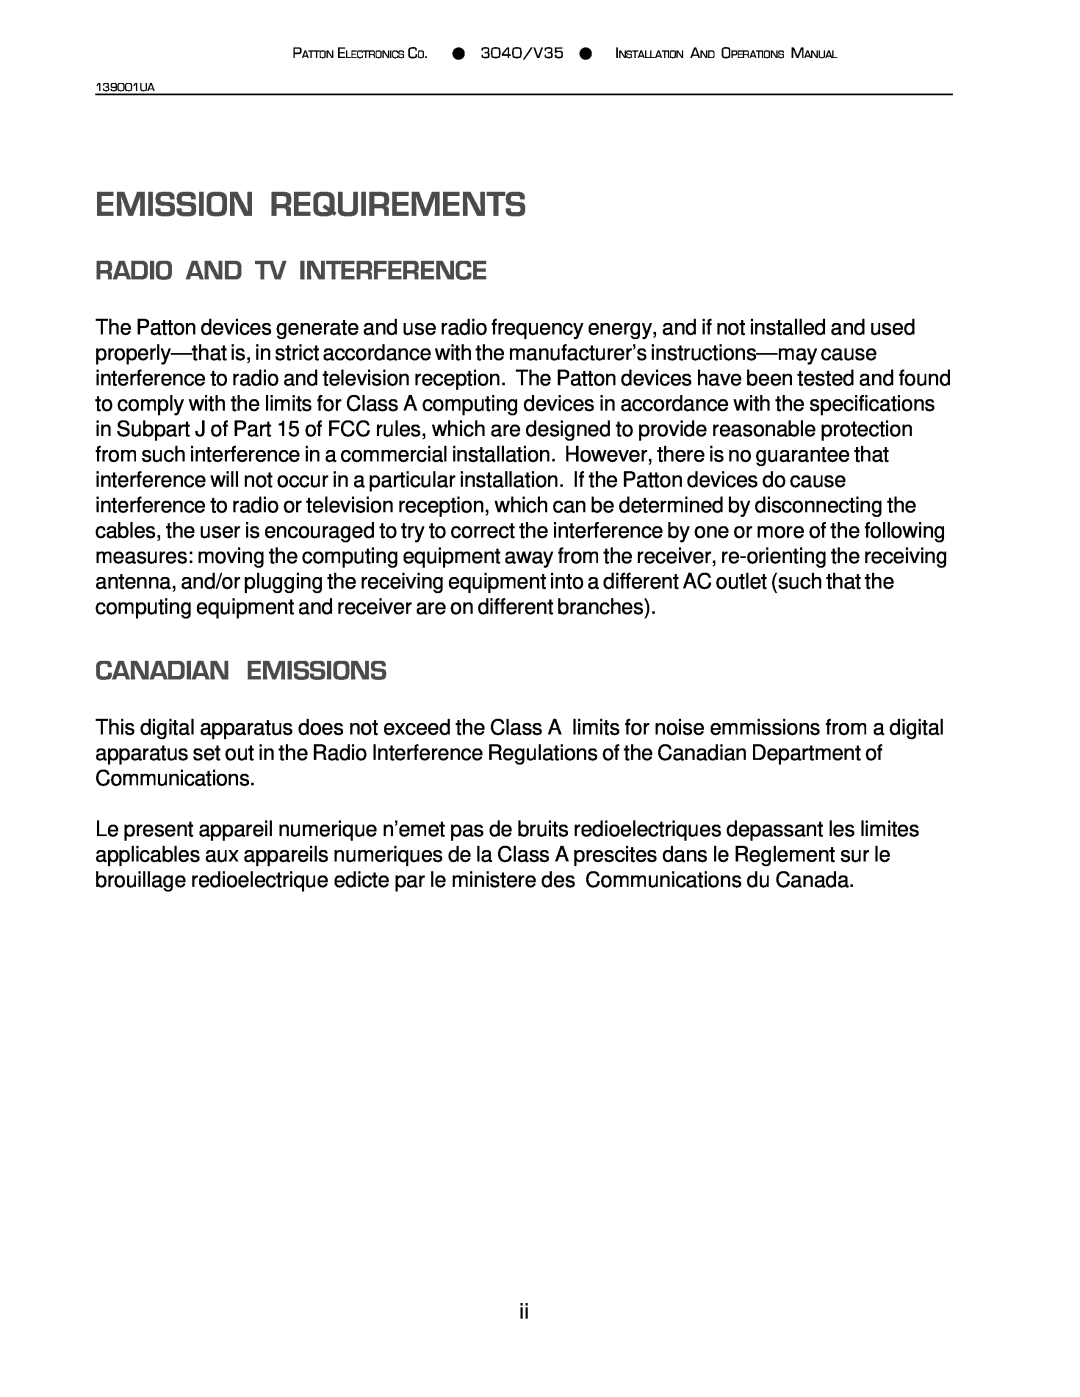 Patton electronic 3040/V35 manual Emission Requirements, Radio And Tv Interference, Canadian Emissions 